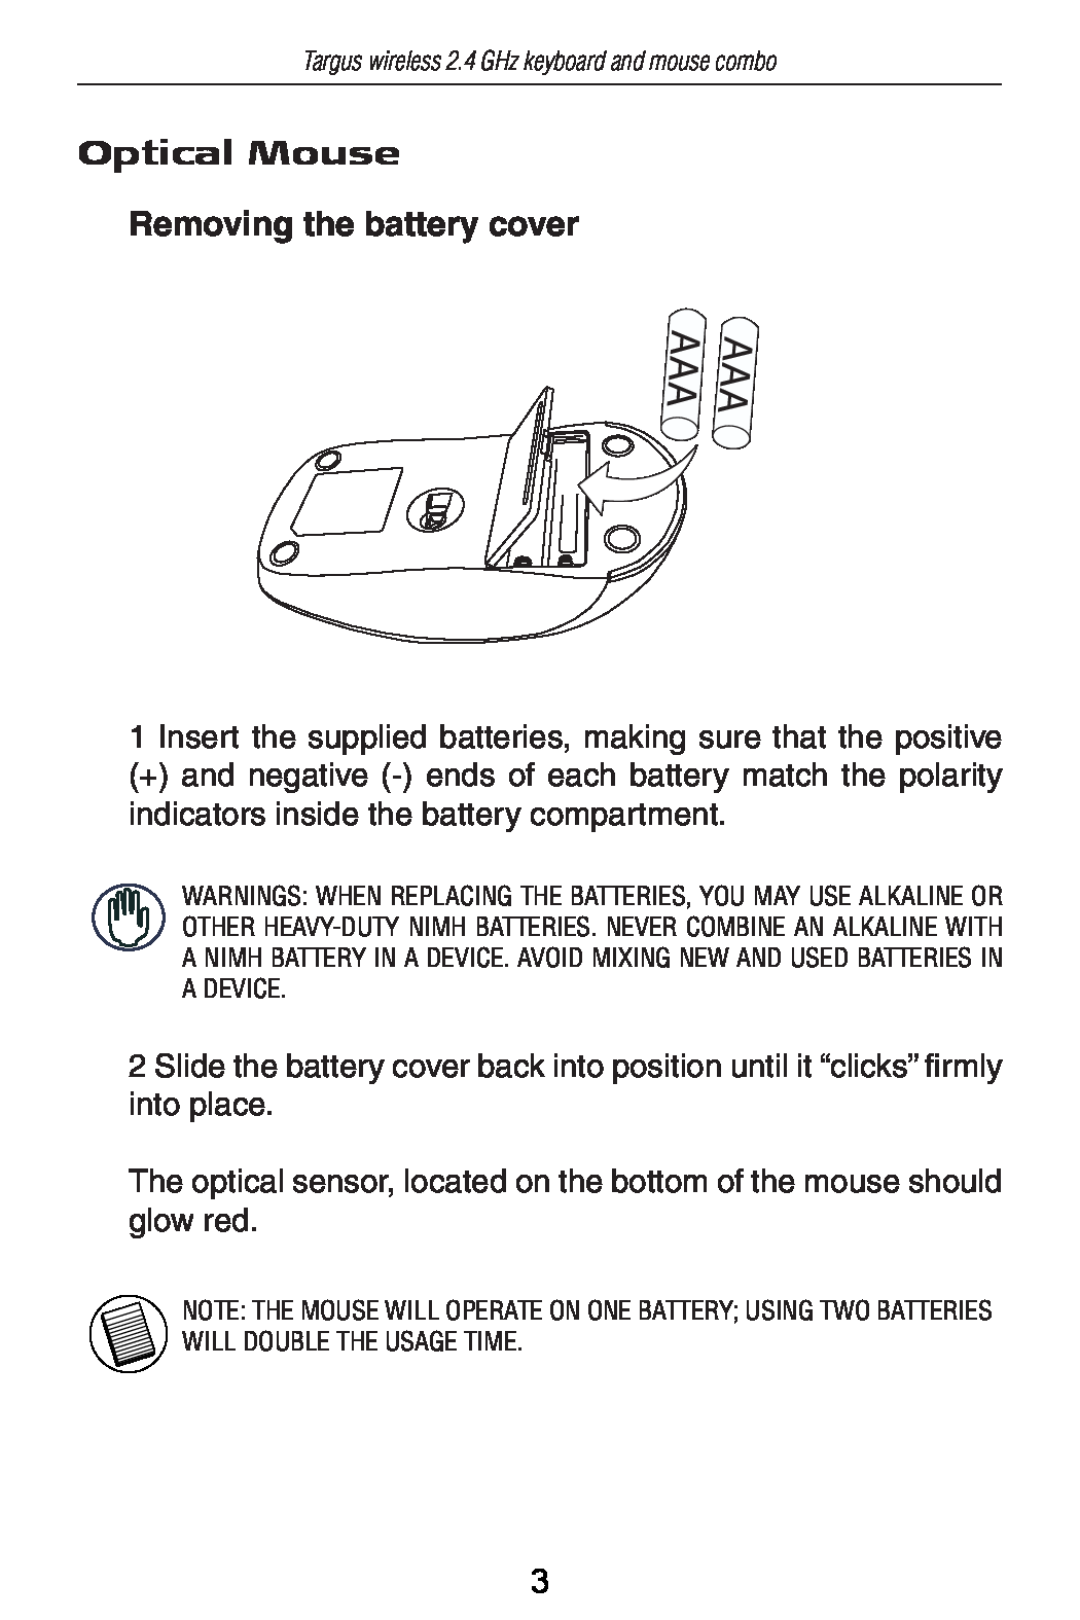 Targus AKM11 specifications Optical Mouse, Removing the battery cover 